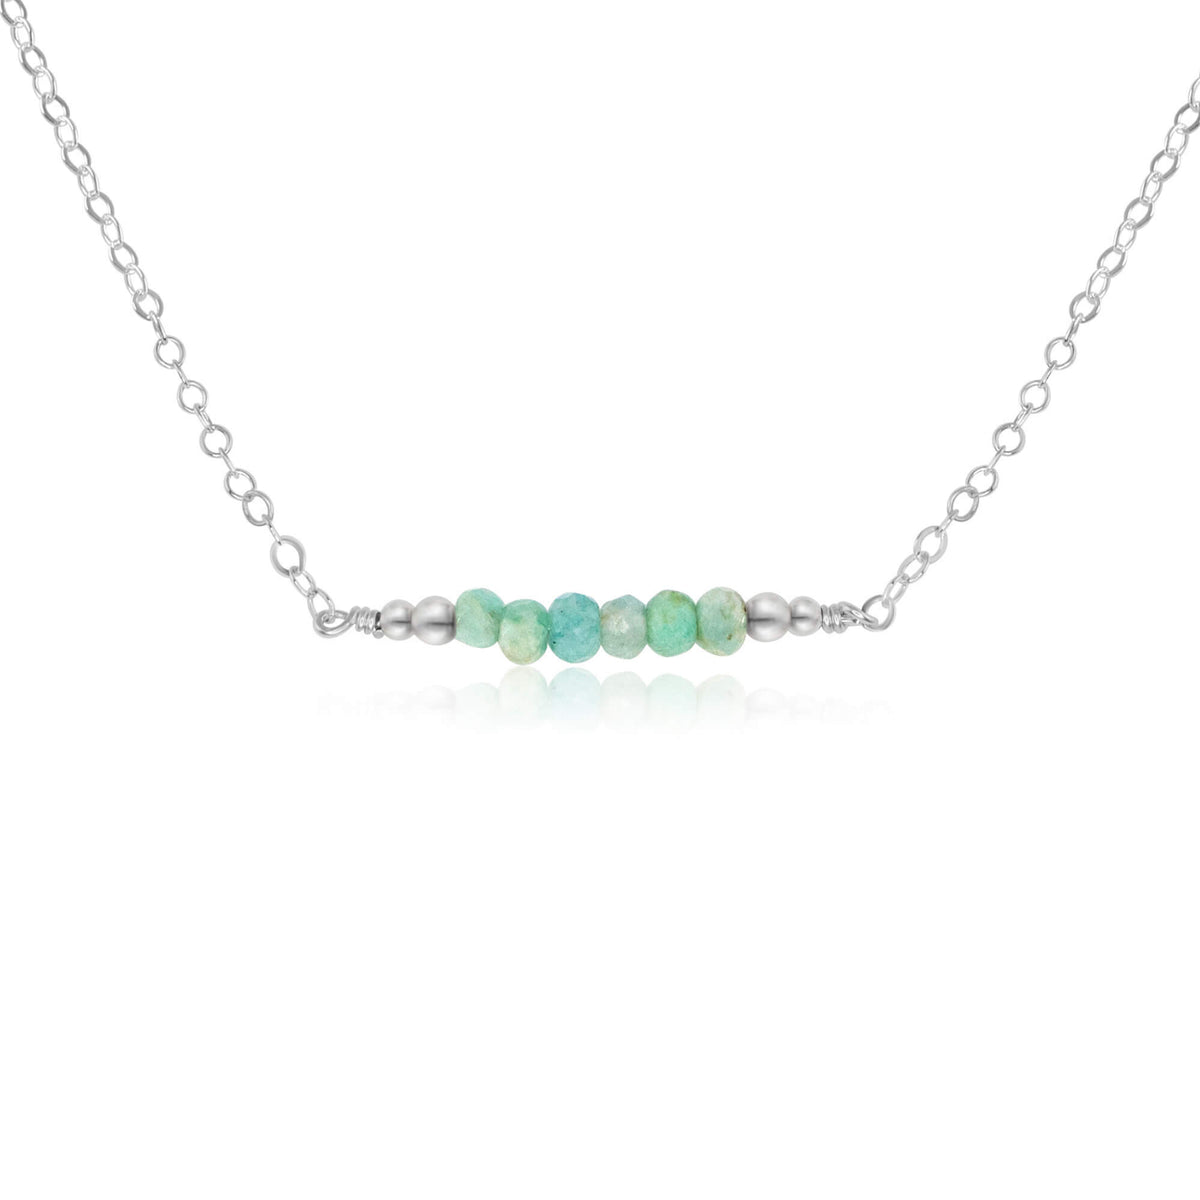 Faceted Bead Bar Necklace - Amazonite - Sterling Silver - Luna Tide Handmade Jewellery